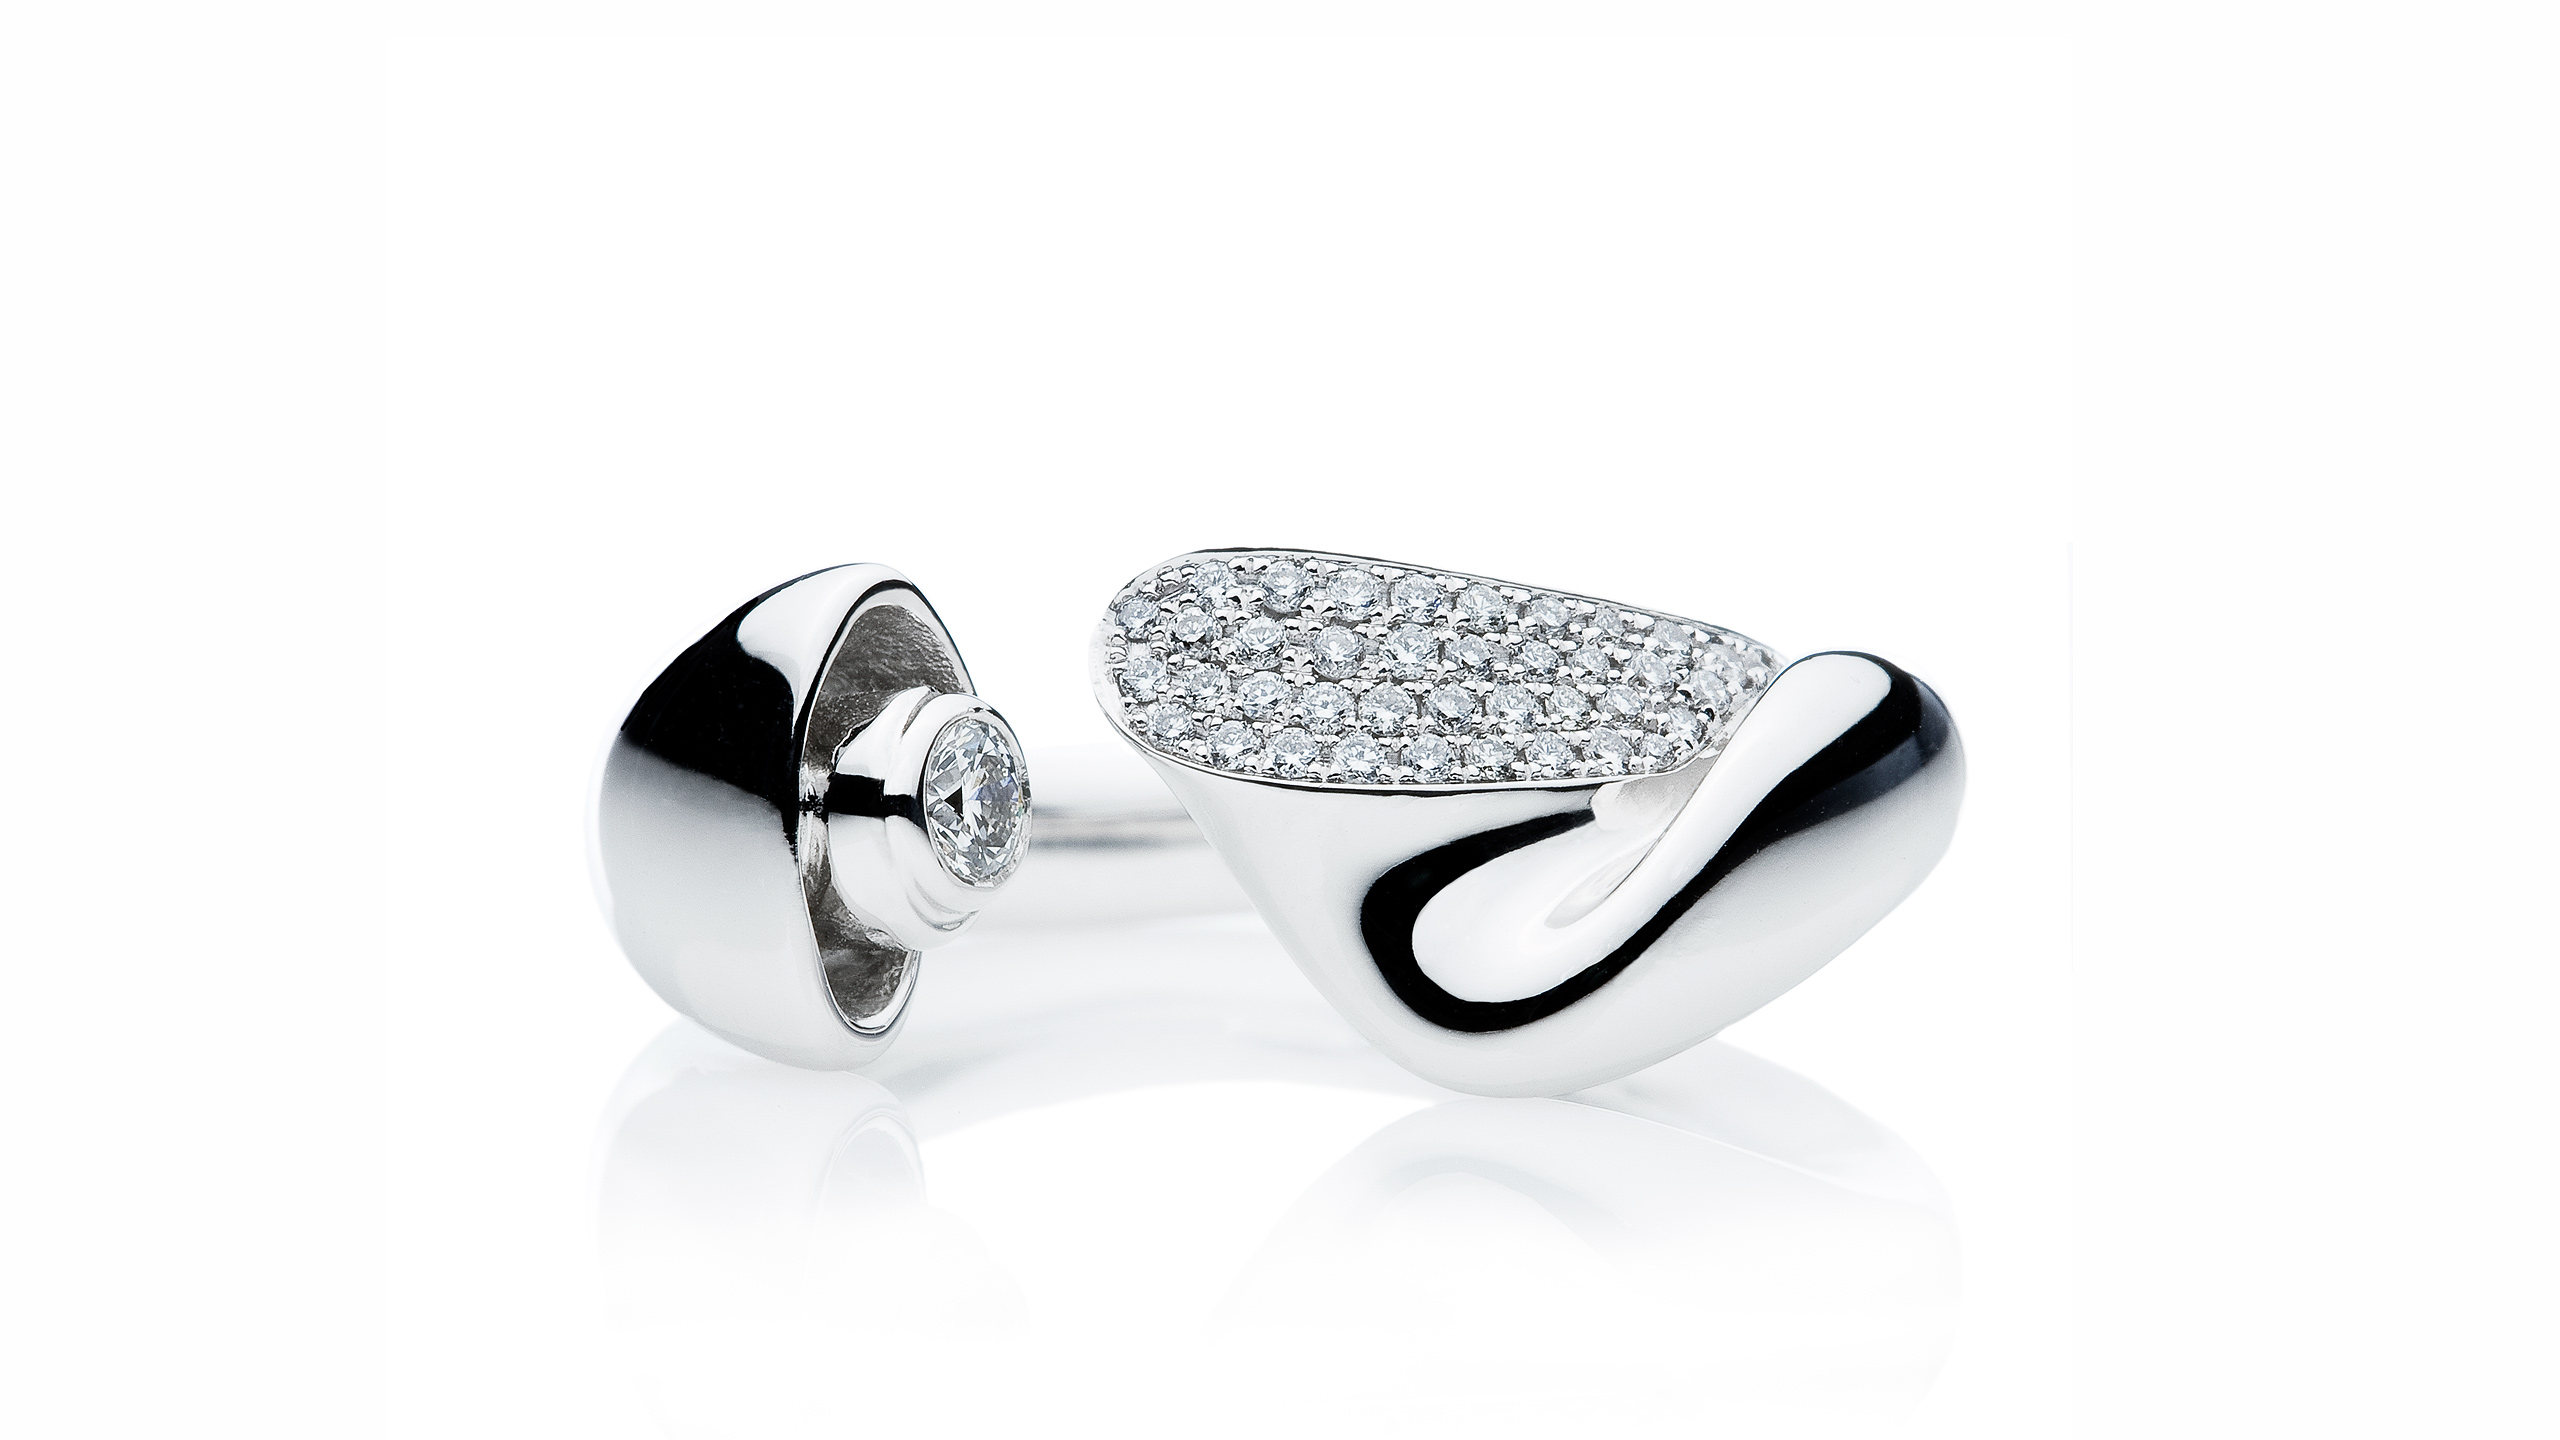 https://towejewels.com/wp-content/uploads/2012/08/Coquille-ring-20110217_0044_OK_2560x1440_Overview_Web.jpg